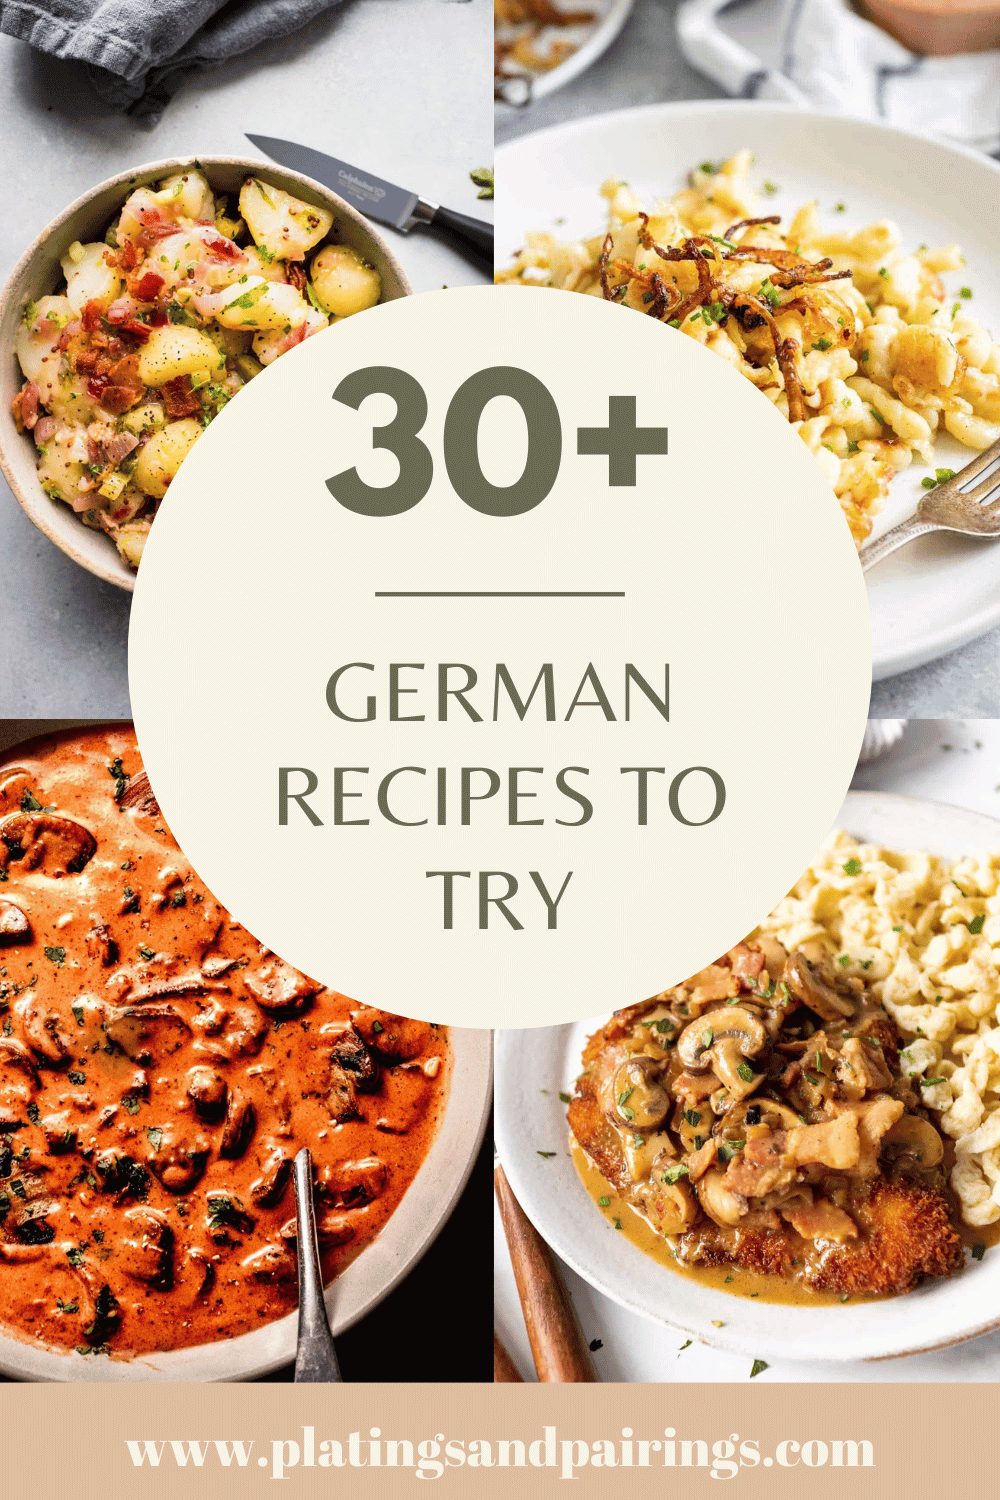 Collage of german recipes with text overlay.